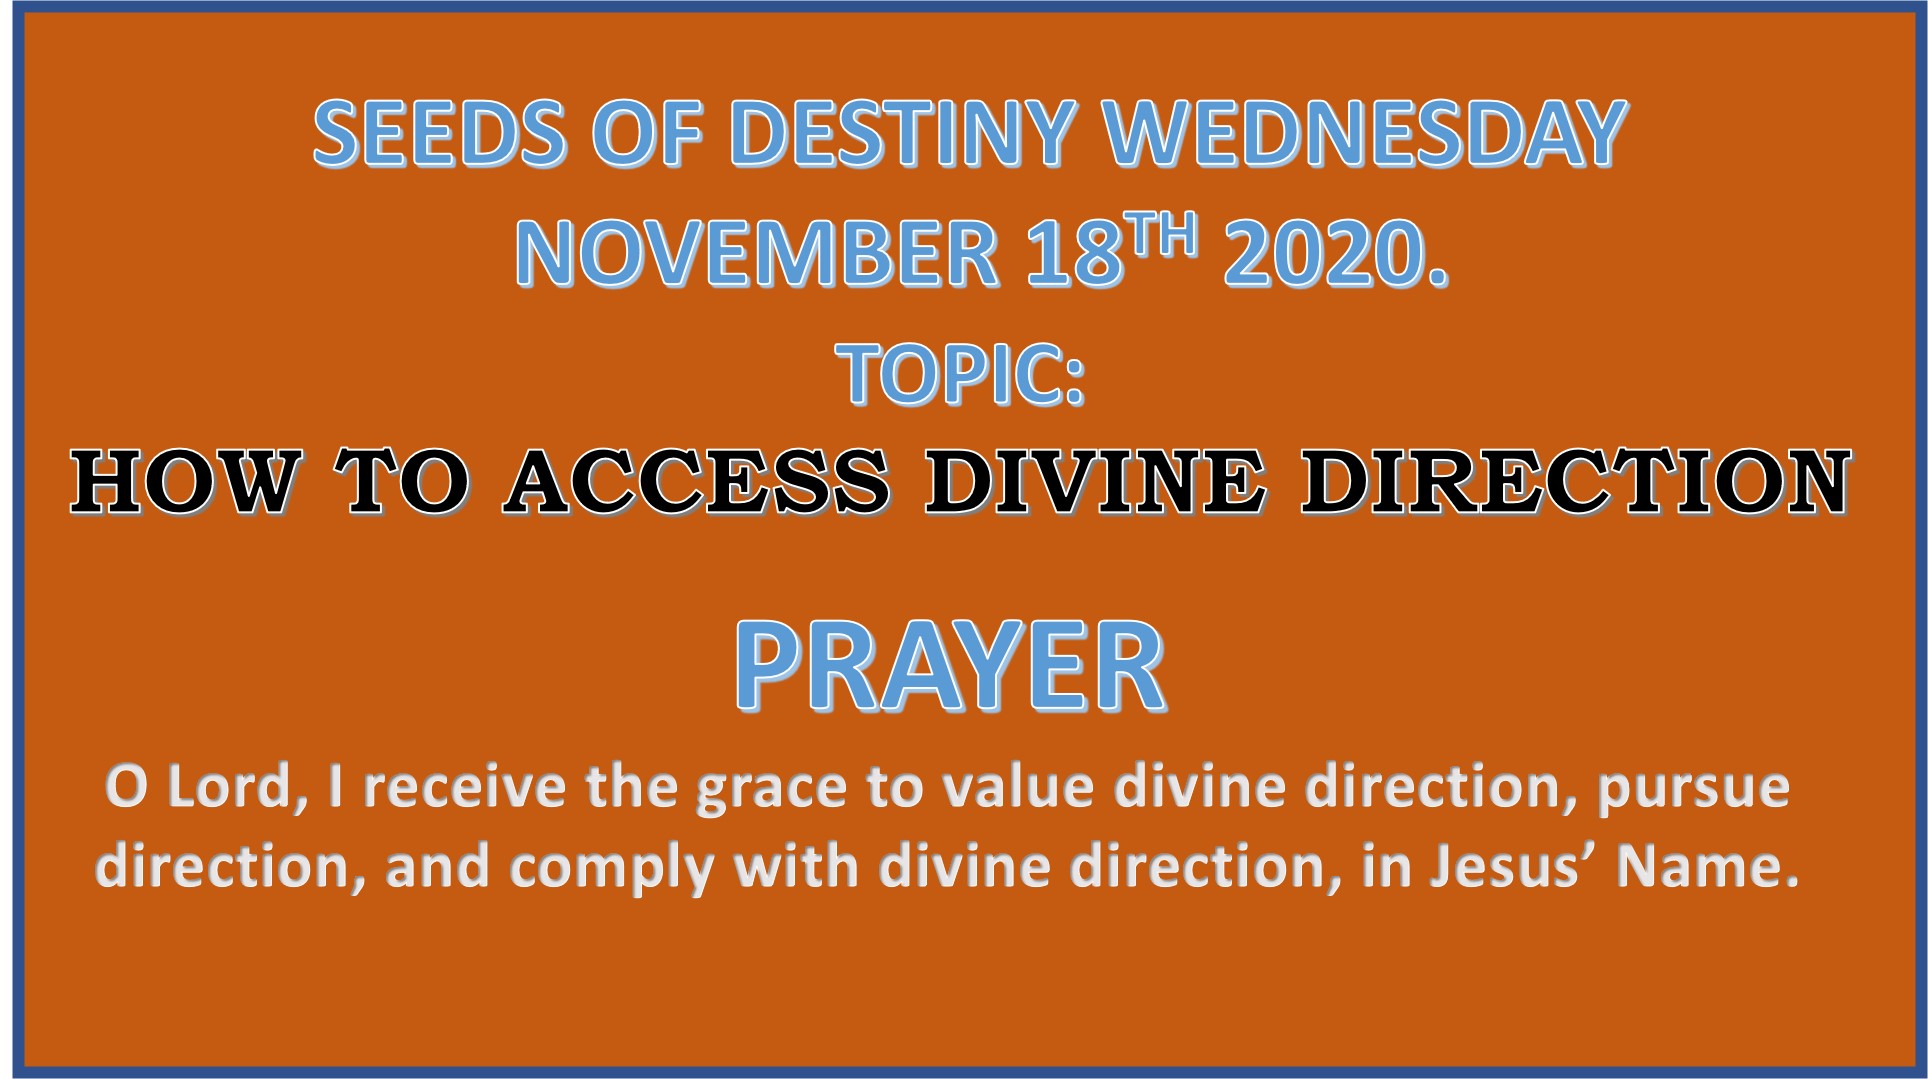 Seeds of Destiny Wednesday 18th November 2020 by Dr Paul Enenche